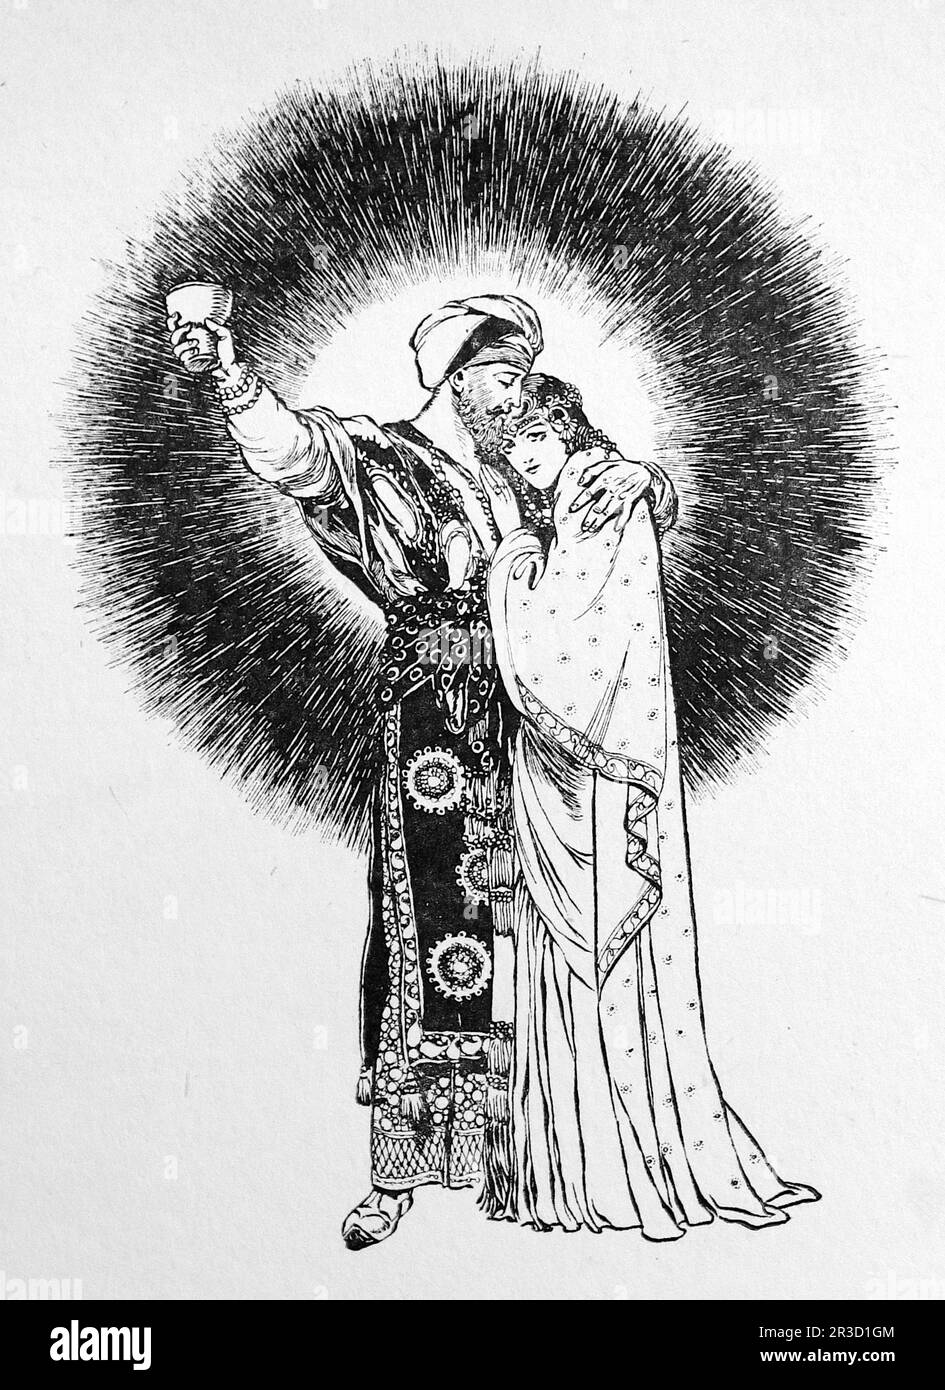 By Rene Bull. Line drawing of a man embracing a woman, his arm outstretched with a cup of wine. From The Rubaiyat of Omar Khayyam. Stock Photo